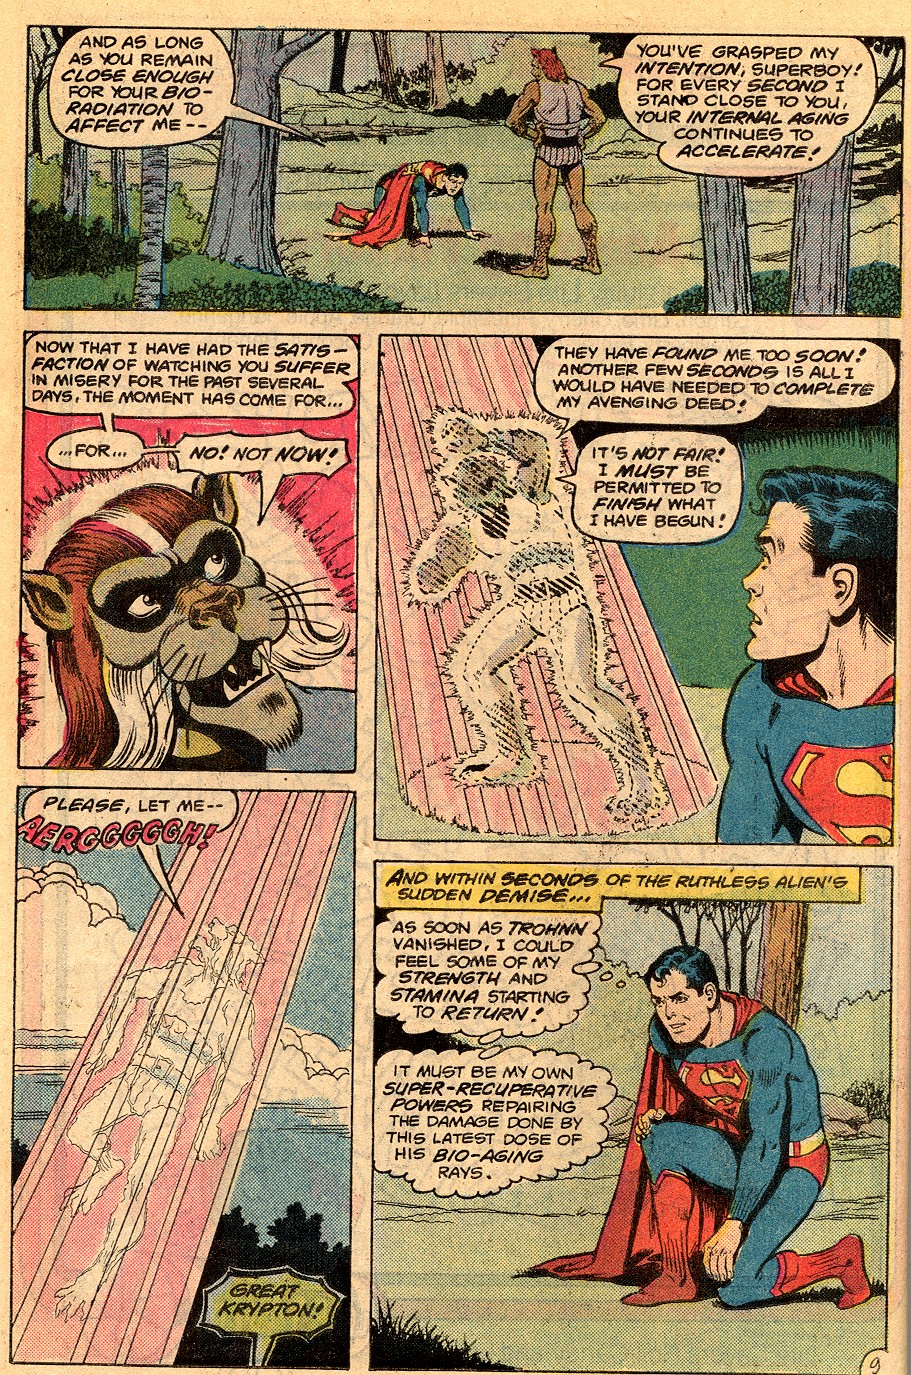 The New Adventures of Superboy 33 Page 13